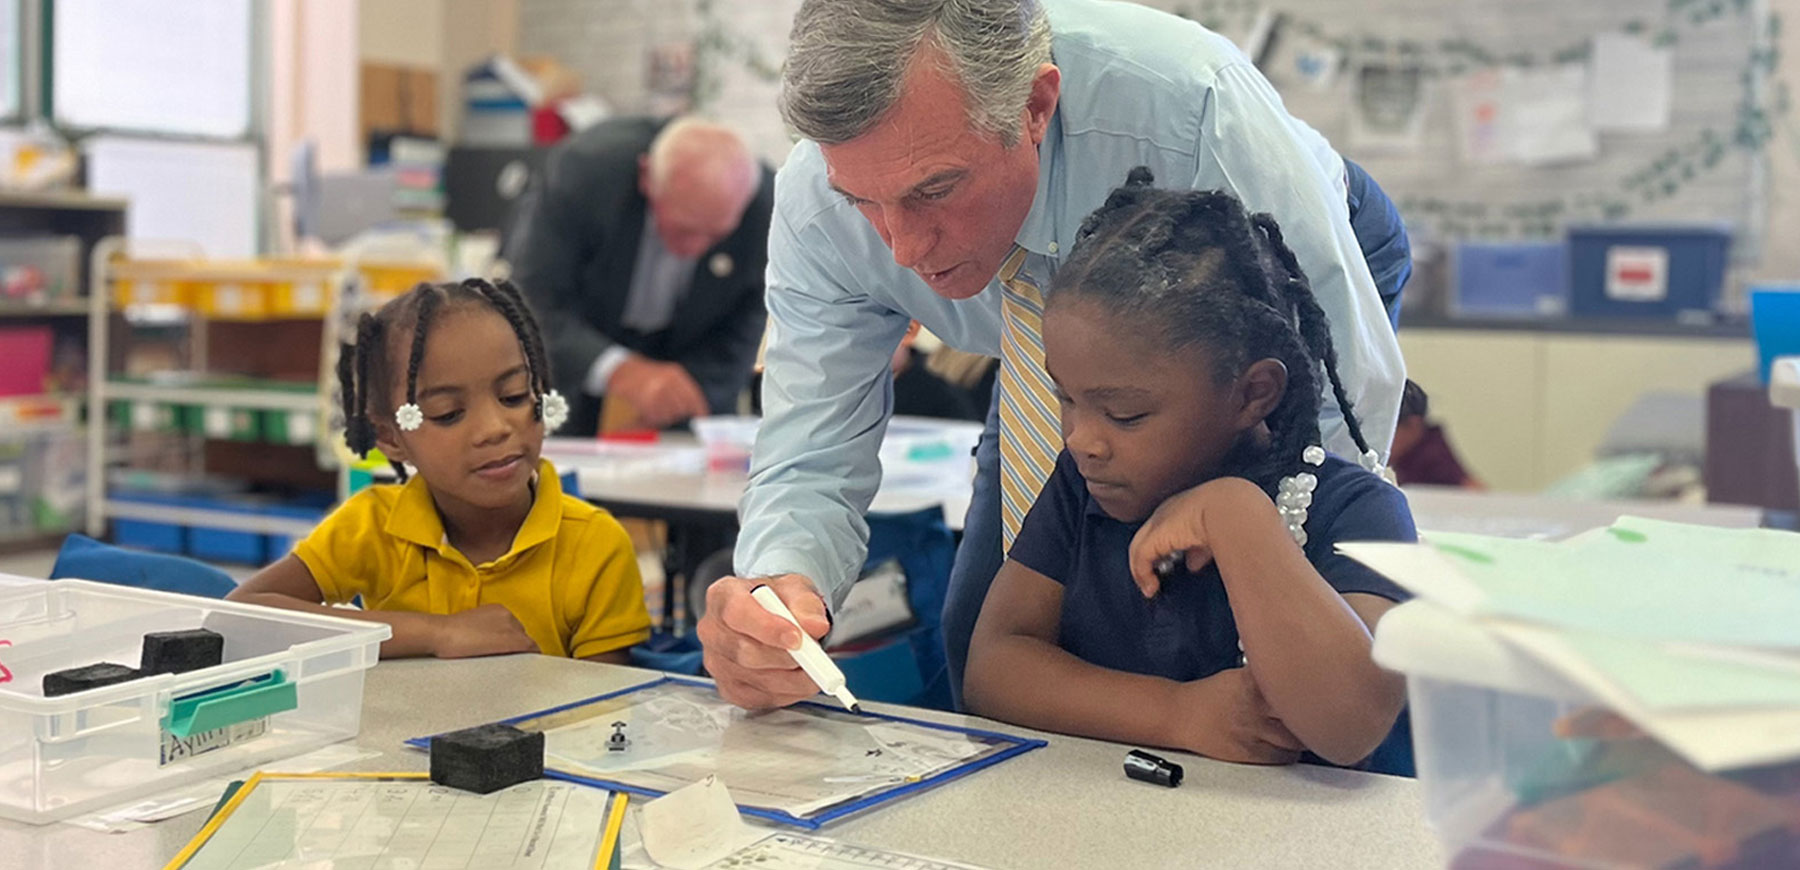 Governor John Carney at a desk with two elementary school students